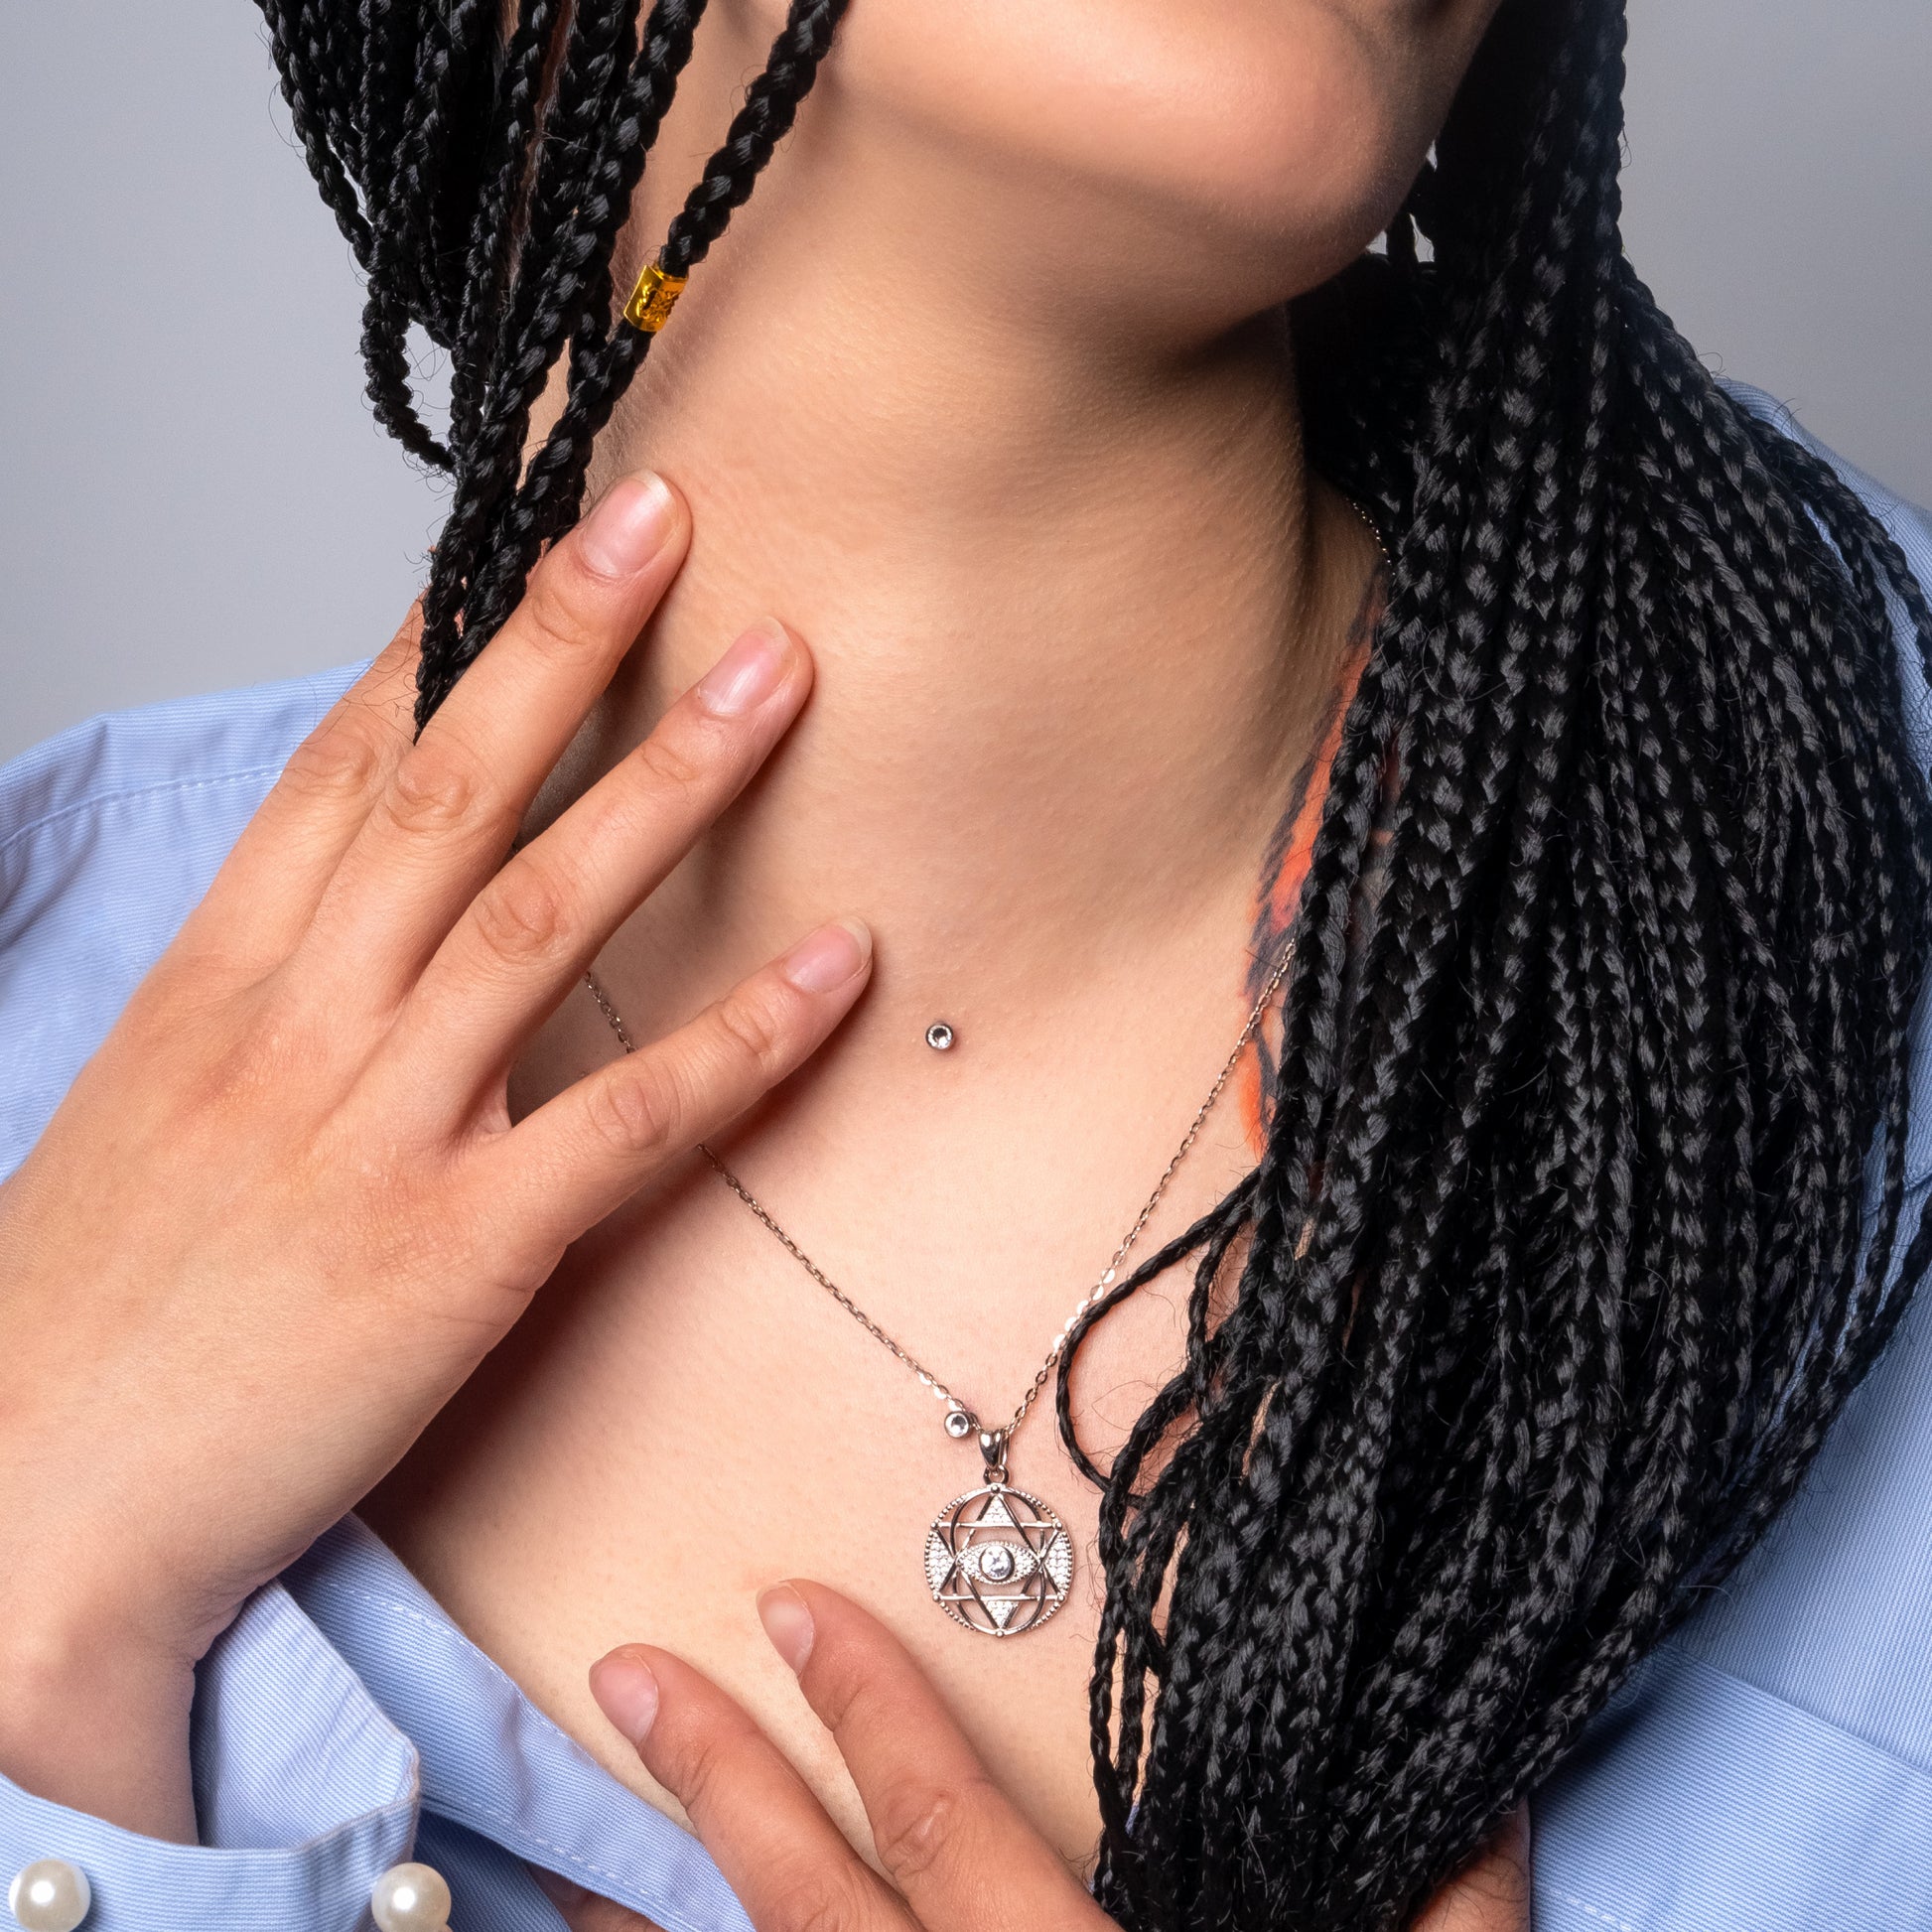 Model wearing Iced Evil Eye Pendant with Flat Cable necklace.